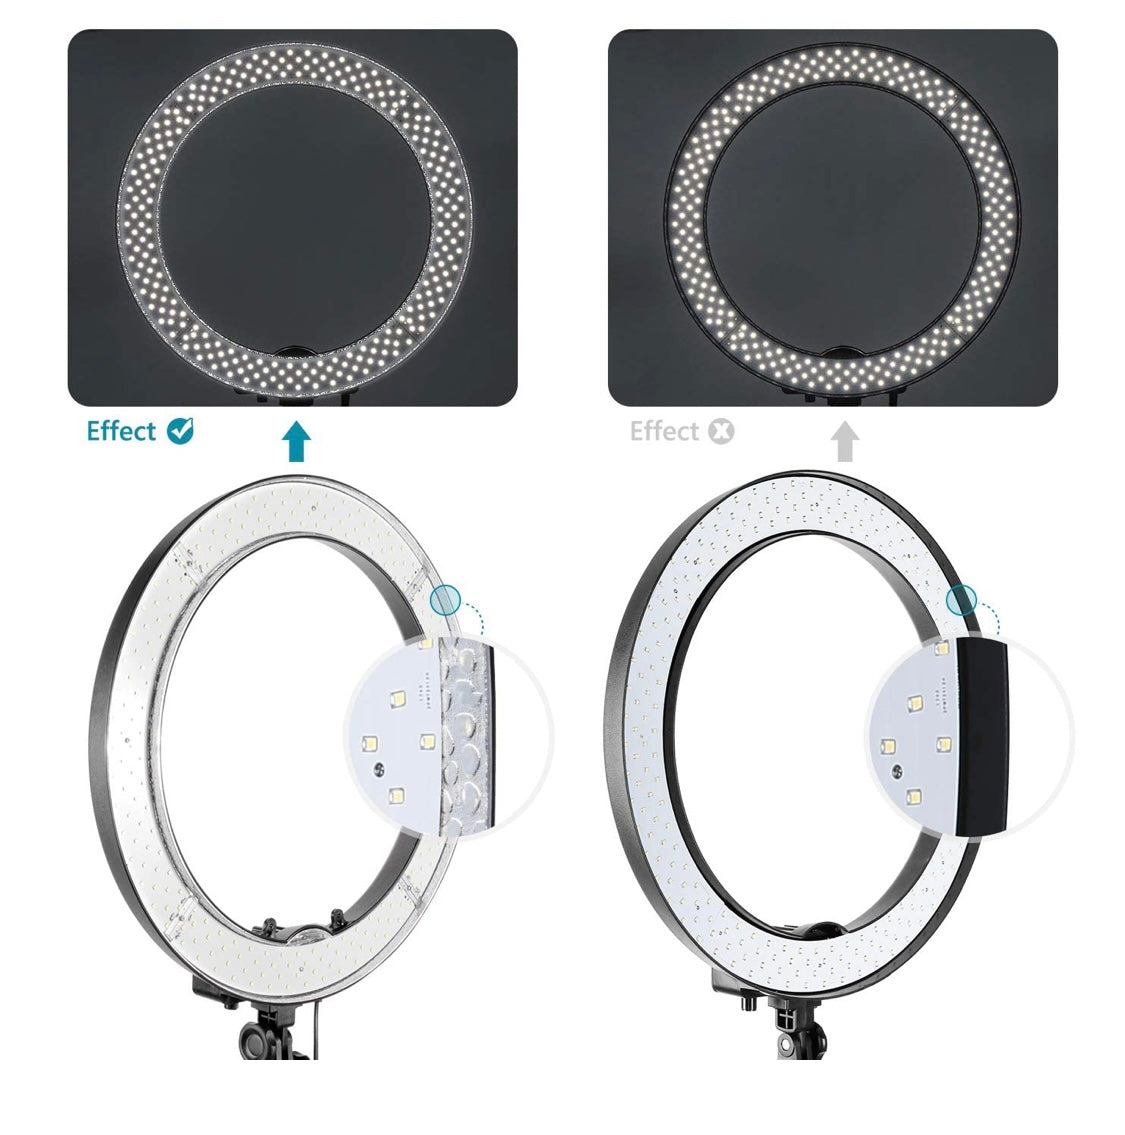 RING LIGHT IDEAL FOR LASH EXTENSIONS APPLICATION